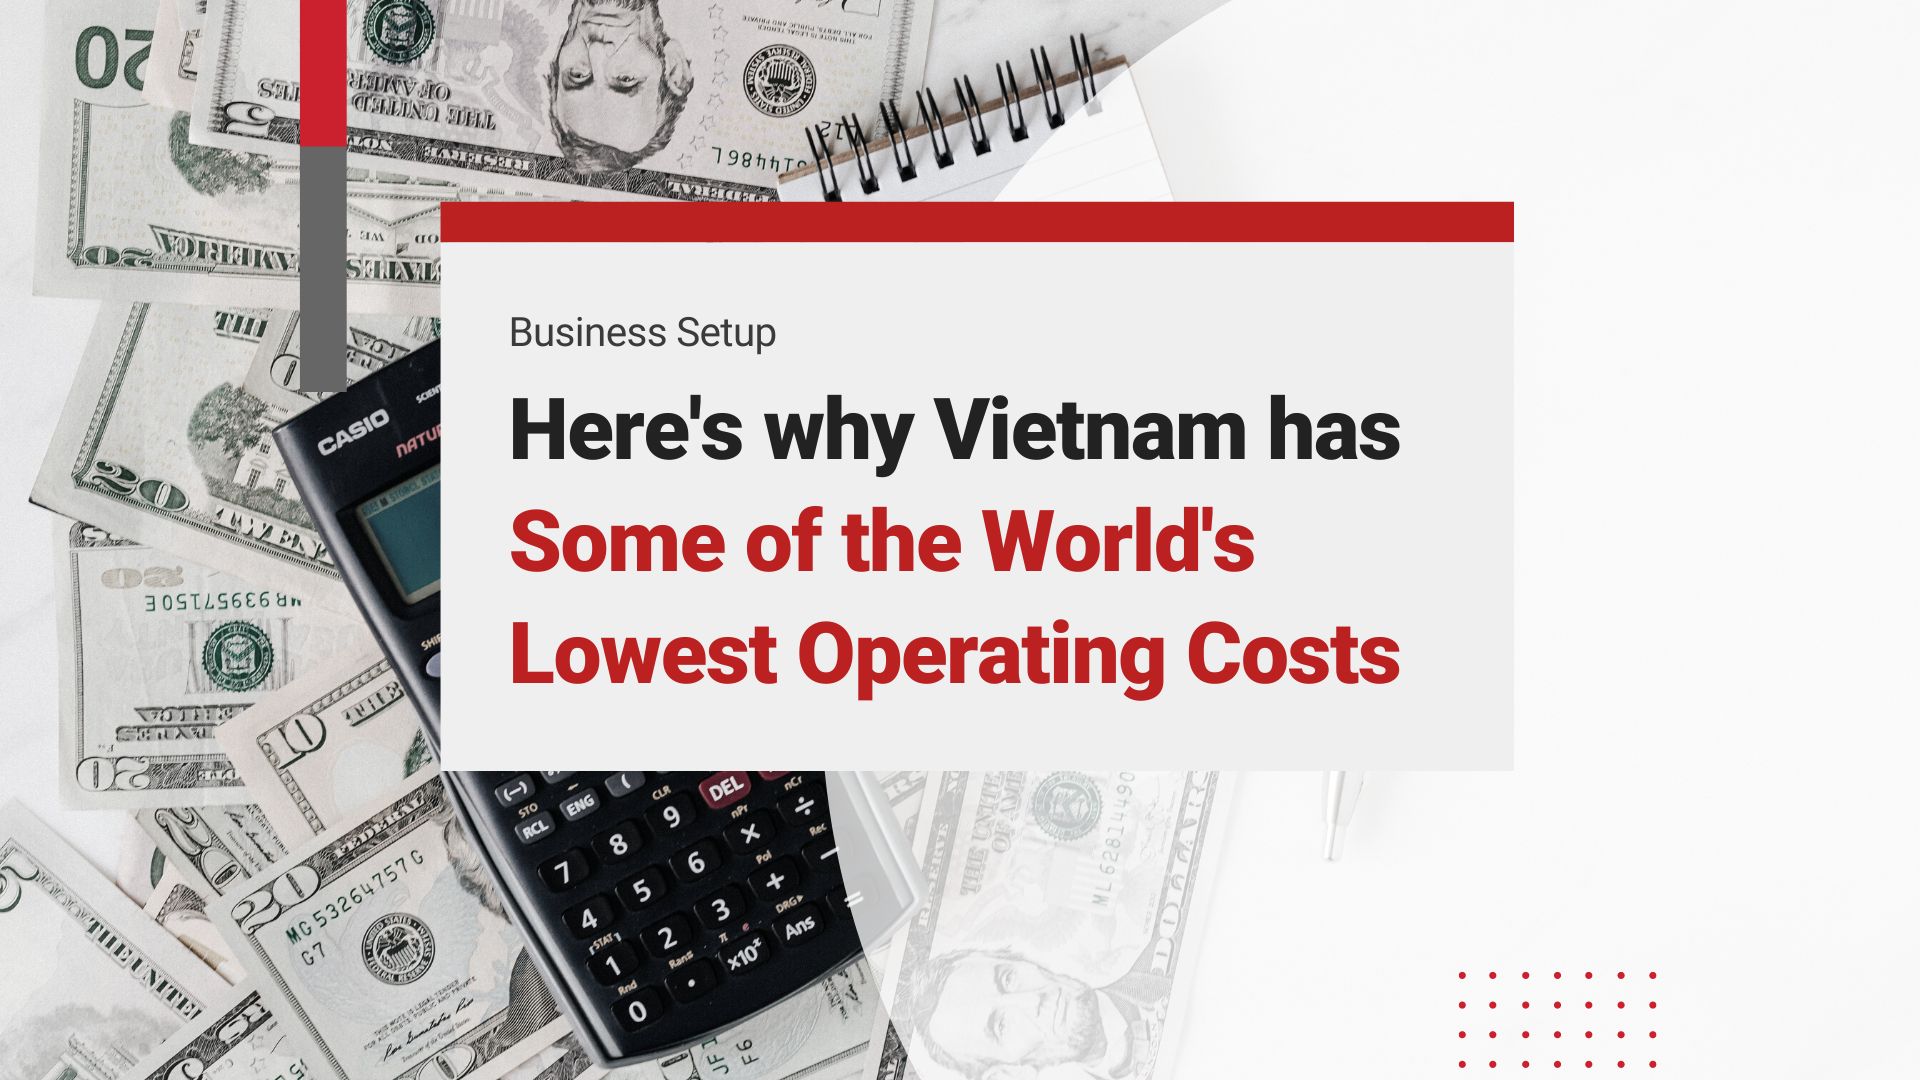 Here’s why Vietnam has Some of the World’s Lowest Operating Costs